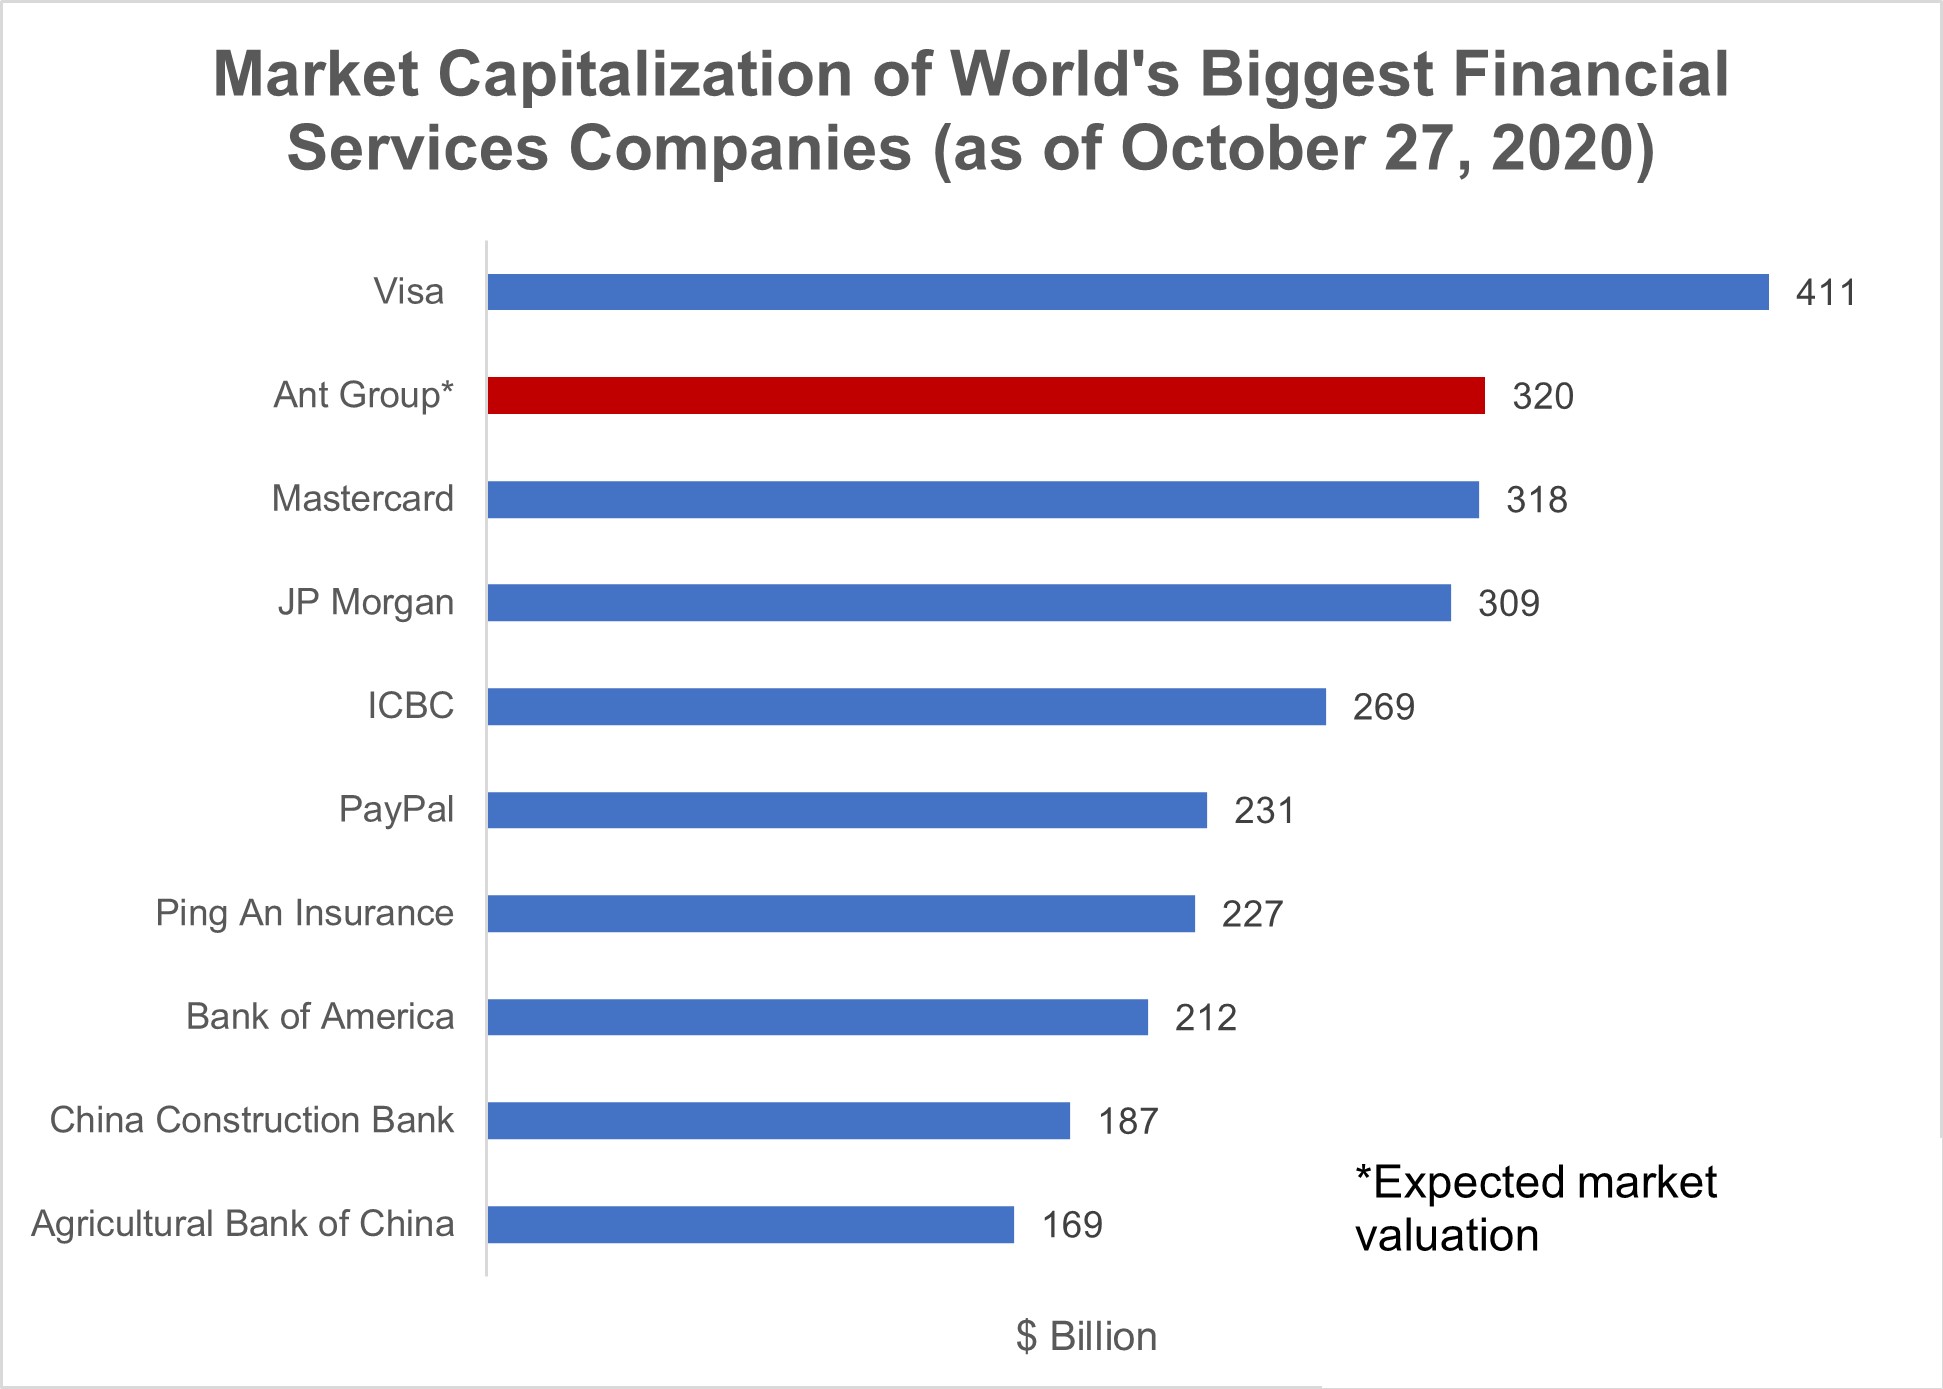 Market Capitalization of World's Biggest Financial Services Companies (as of October 27, 2020)